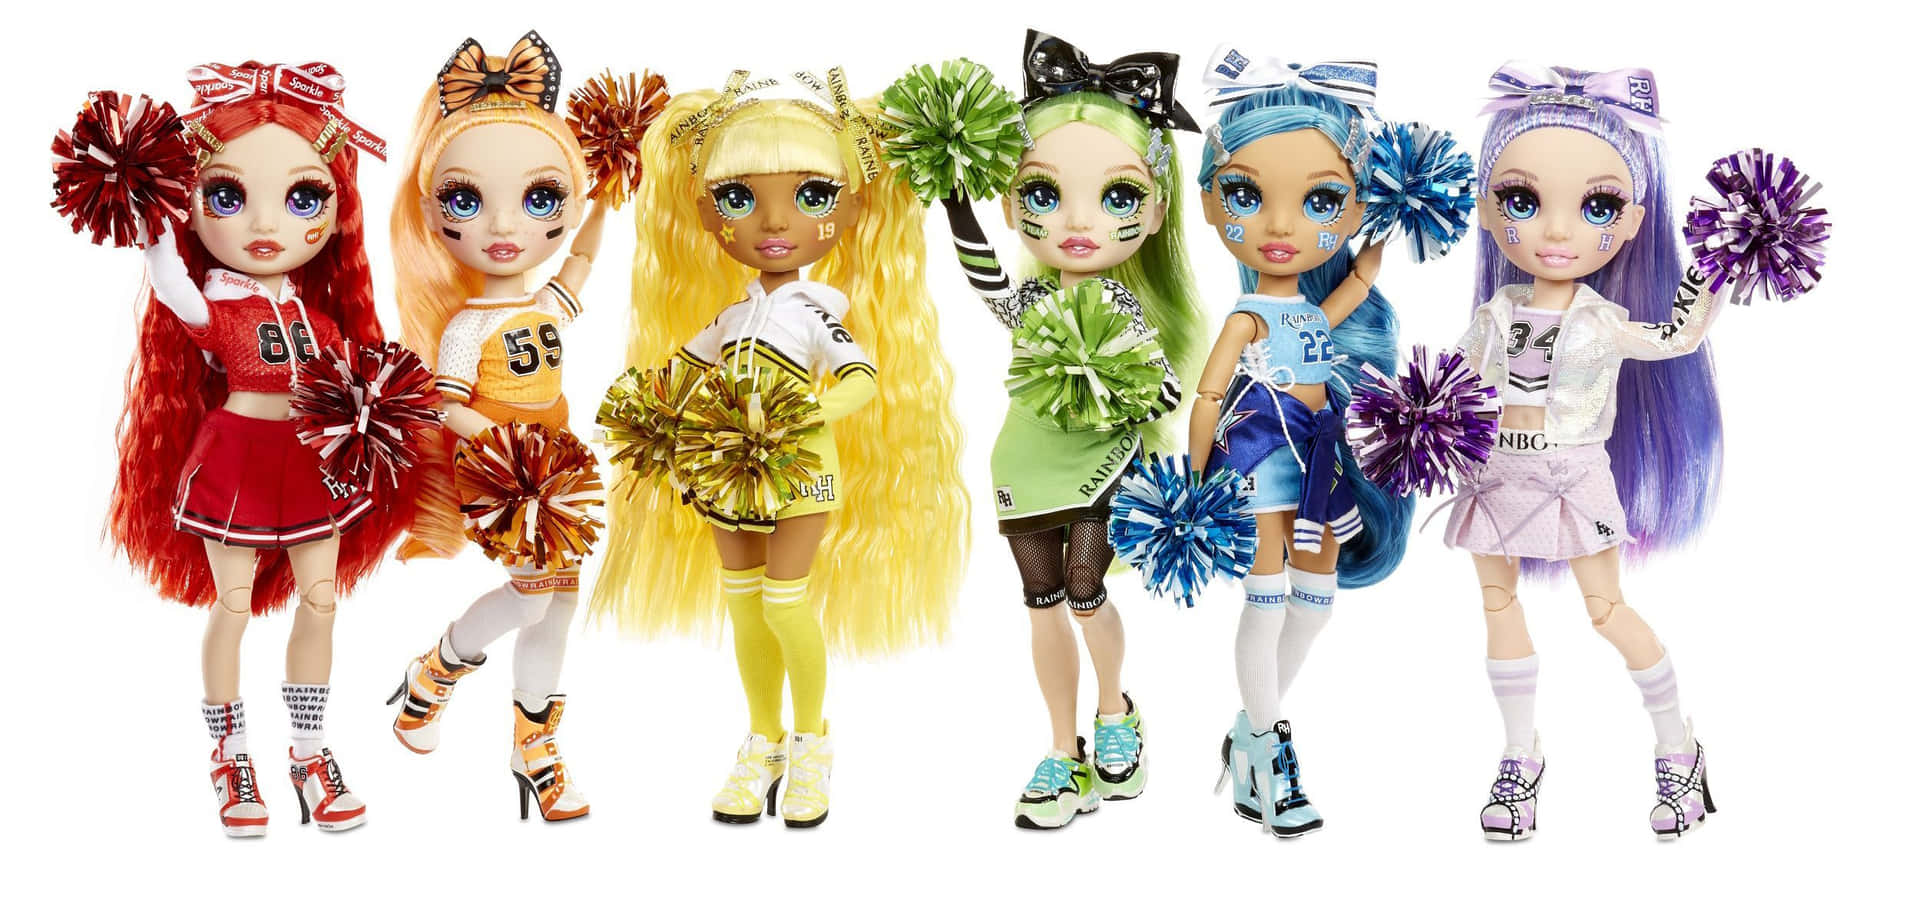 A Group Of Cheerleader Dolls With Colorful Hair Wallpaper